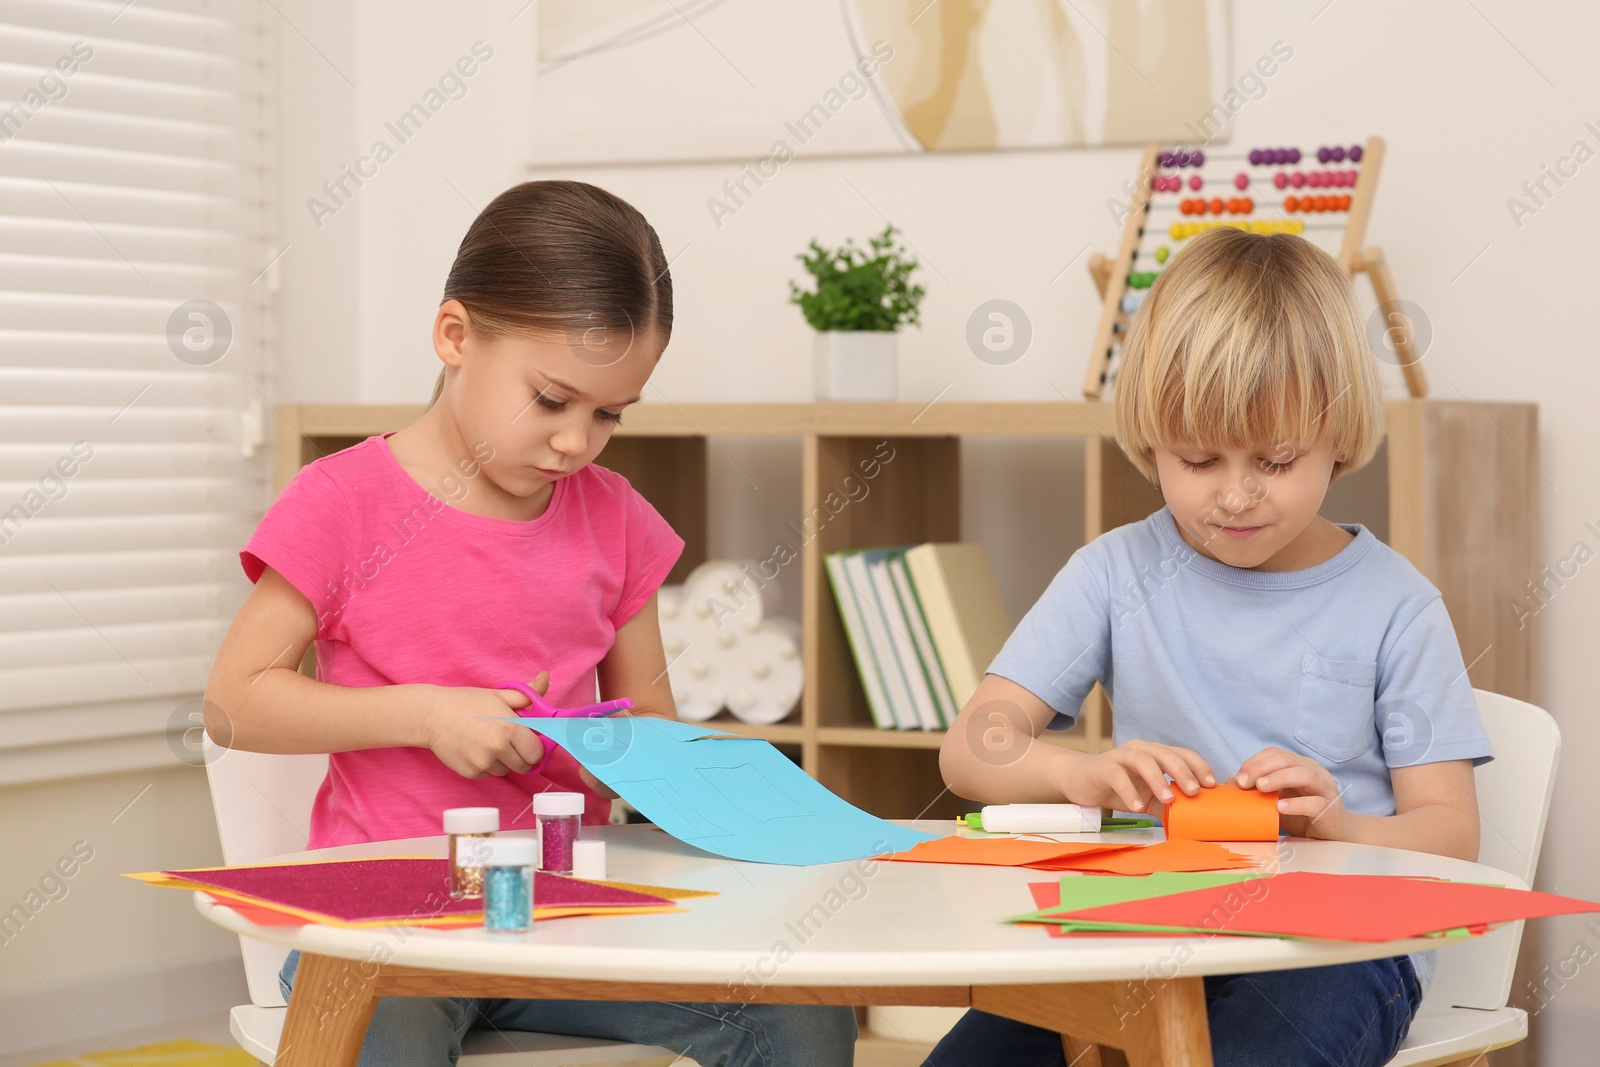 Photo of Cute children cutting colorful paper at desk in room. Home workplace